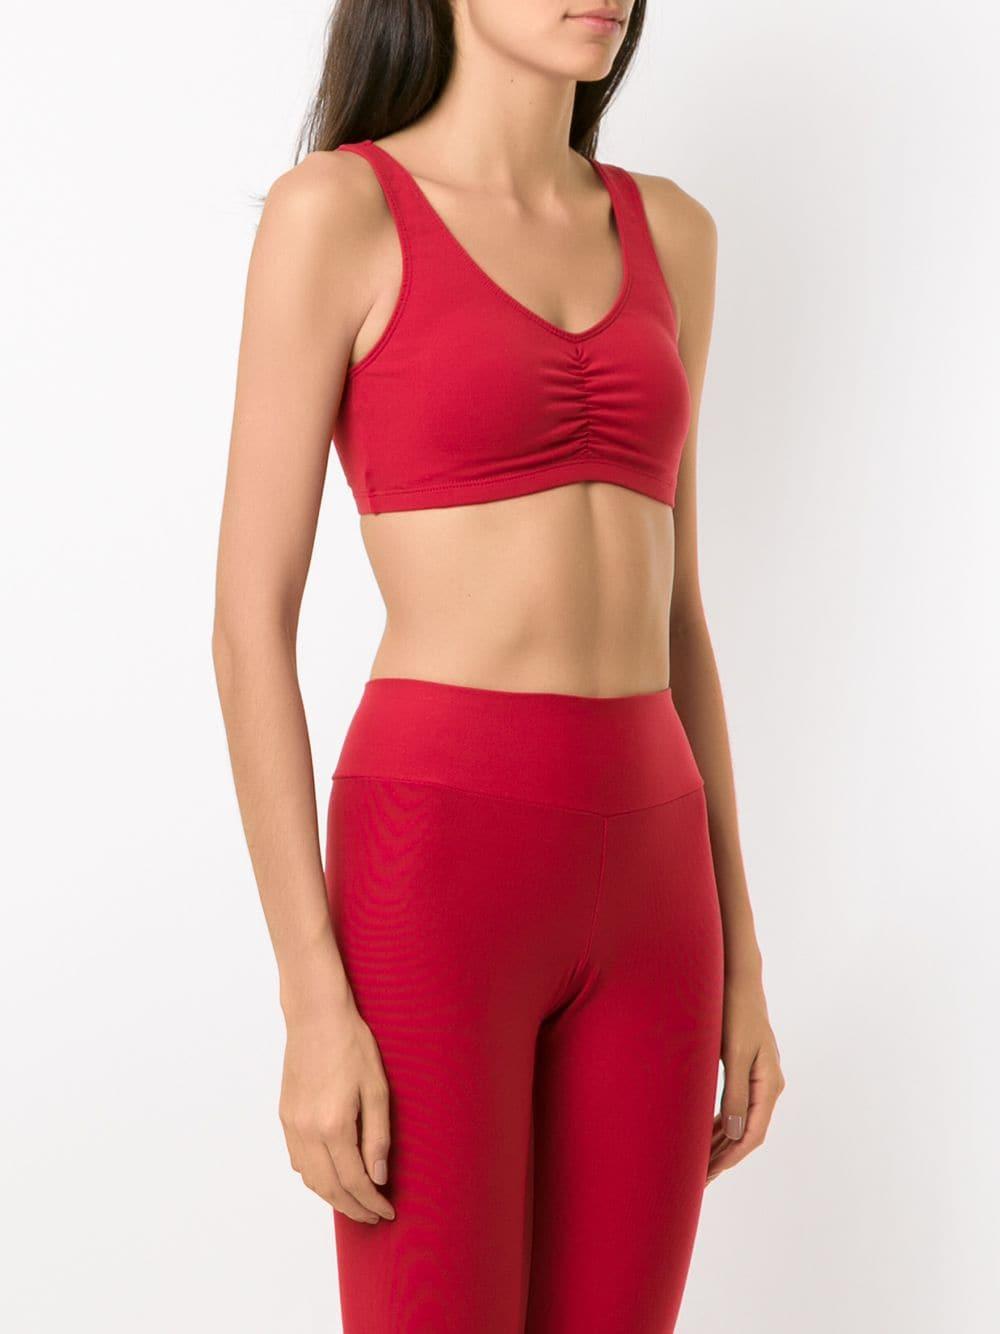 Lygia & Nanny Synthetic Bio Up Sports Top in Red - Lyst